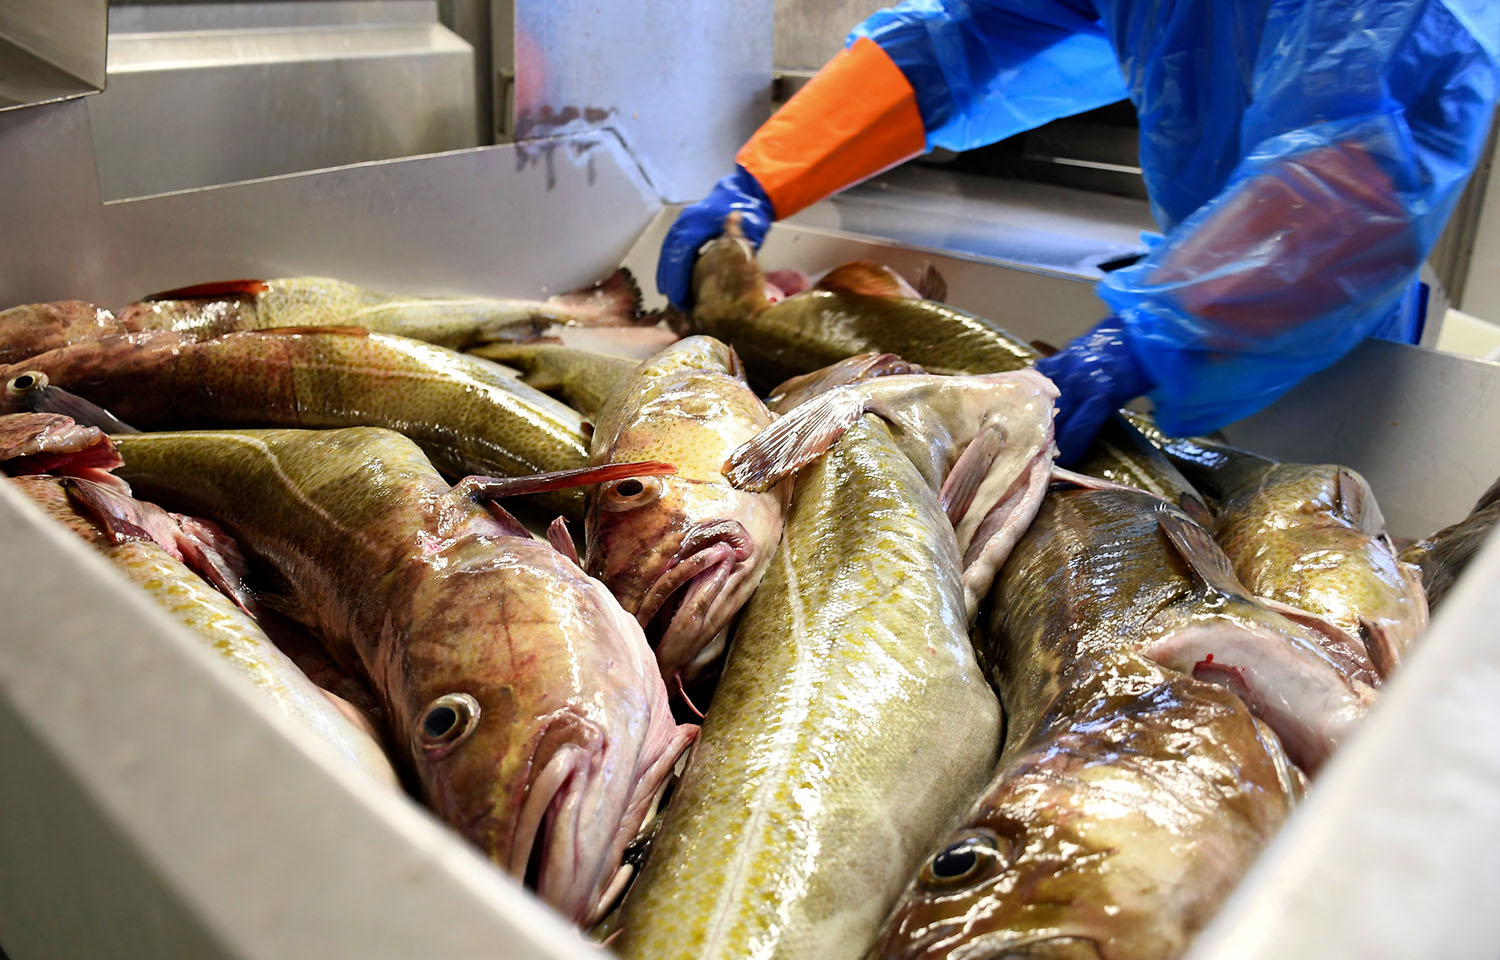 Norwegian Fisheries Council predicts dark clouds on the horizon for country’s seafood exports